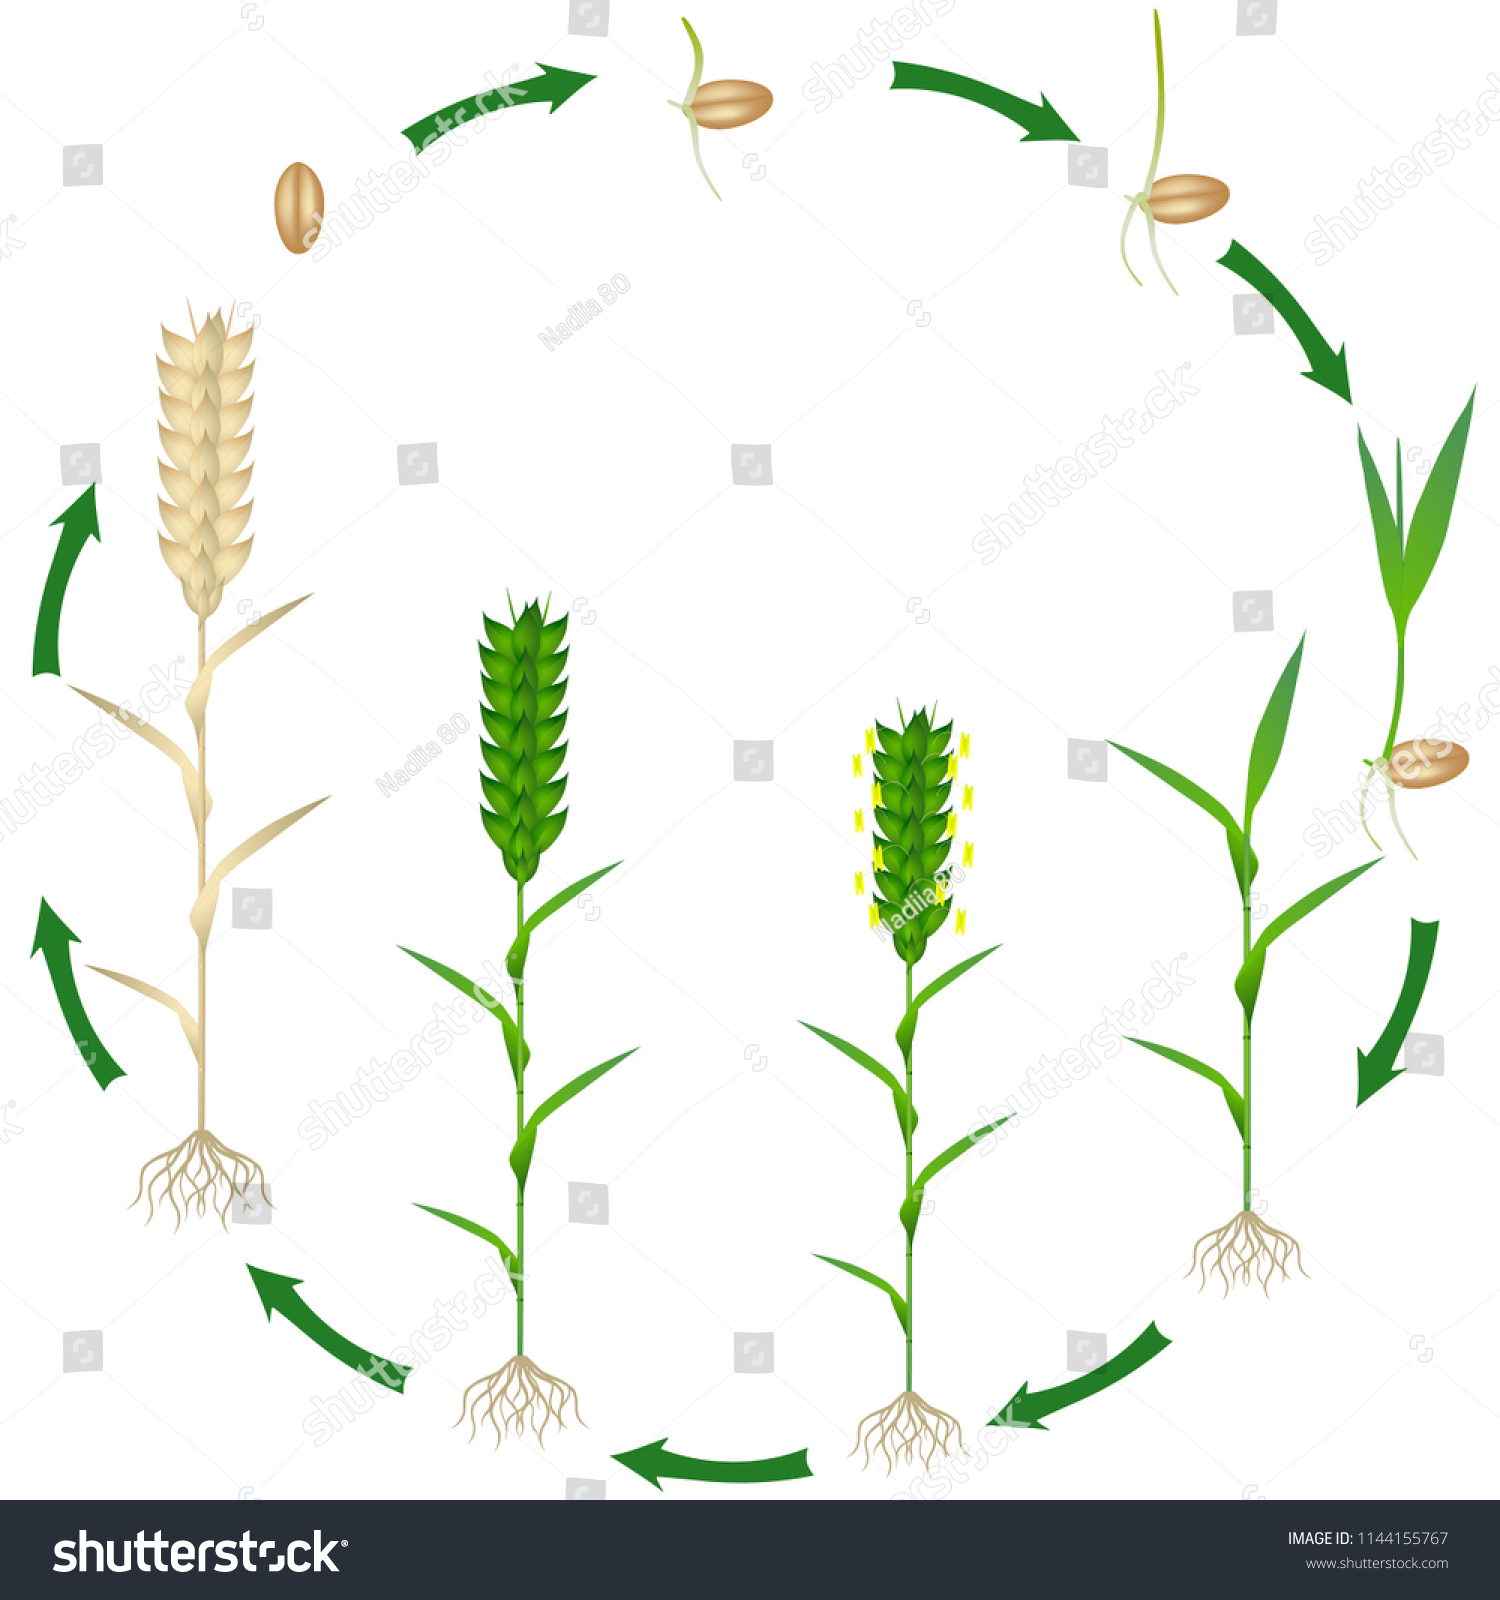 Life Cycle Wheat Plant Plant On Stock Vector (Royalty Free) 1144155767